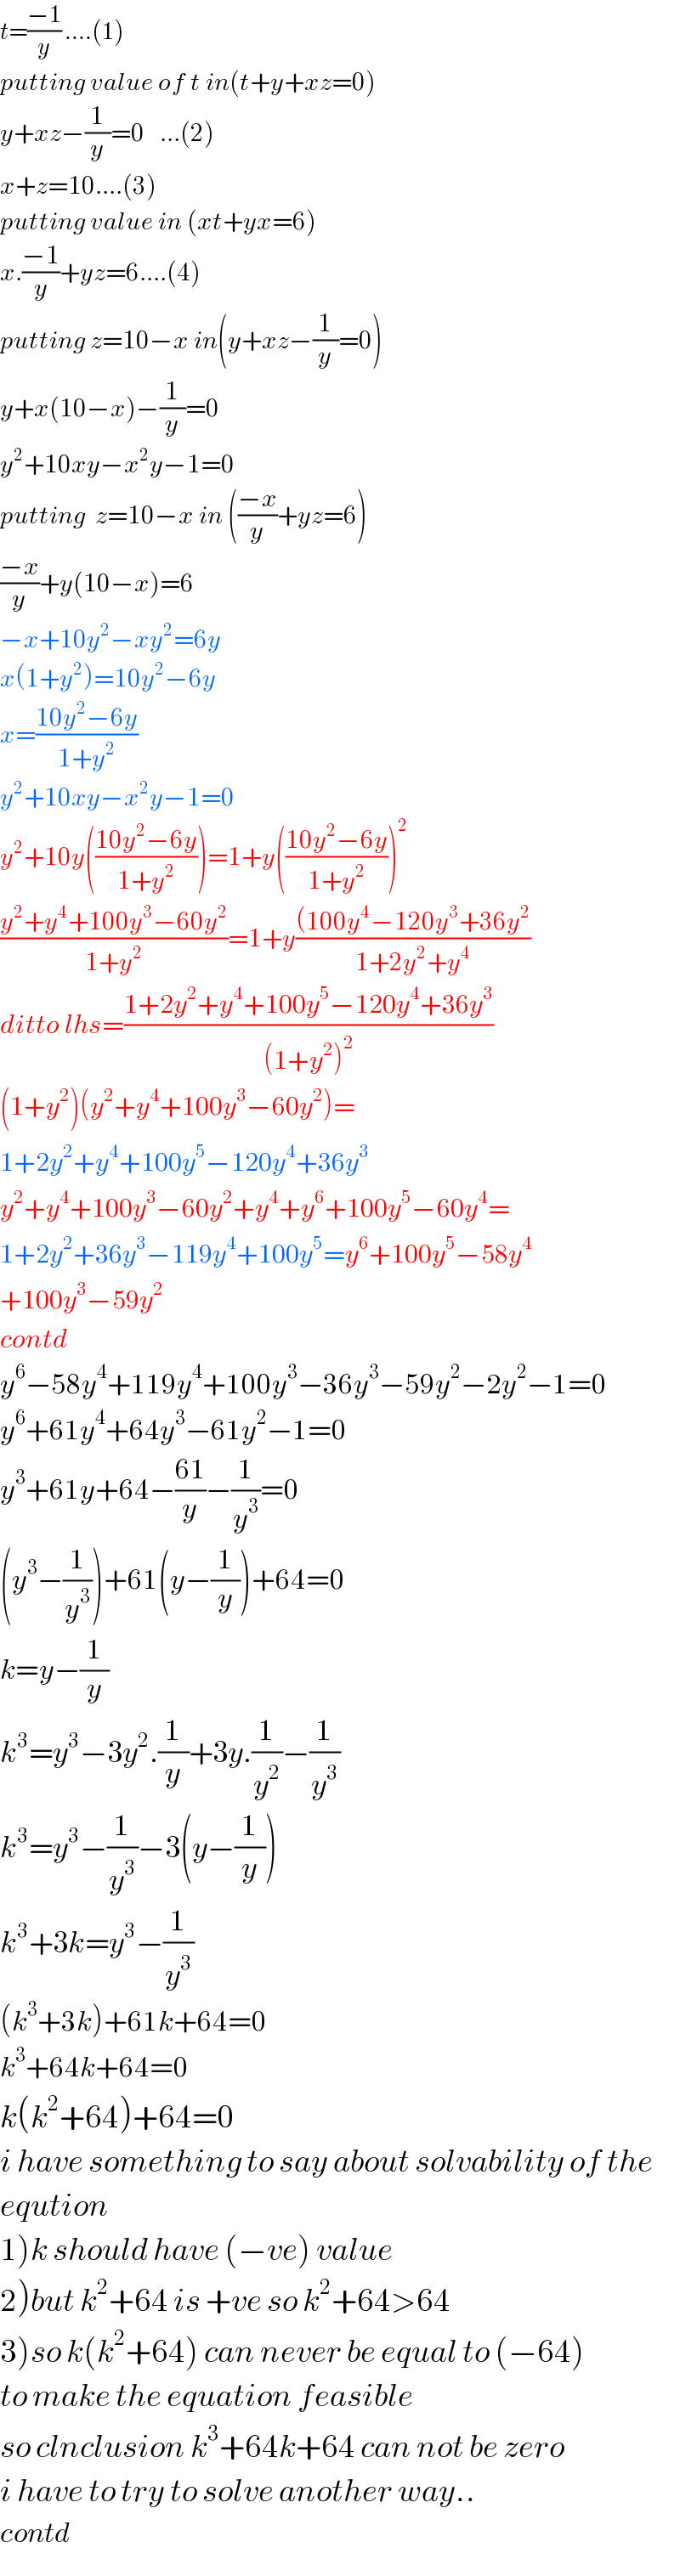 t=((−1)/y) ....(1)  putting value of t in(t+y+xz=0)  y+xz−(1/y)=0   ...(2)  x+z=10....(3)  putting value in (xt+yx=6)  x.((−1)/y)+yz=6....(4)  putting z=10−x in(y+xz−(1/y)=0)  y+x(10−x)−(1/y)=0  y^2 +10xy−x^2 y−1=0  putting  z=10−x in (((−x)/y)+yz=6)  ((−x)/y)+y(10−x)=6  −x+10y^2 −xy^2 =6y  x(1+y^2 )=10y^2 −6y  x=((10y^2 −6y)/(1+y^2 ))  y^2 +10xy−x^2 y−1=0  y^2 +10y(((10y^2 −6y)/(1+y^2 )))=1+y(((10y^2 −6y)/(1+y^2 )))^2   ((y^2 +y^4 +100y^3 −60y^2 )/(1+y^2 ))=1+y(((100y^4 −120y^3 +36y^2 )/(1+2y^2 +y^4 ))  ditto lhs=((1+2y^2 +y^4 +100y^5 −120y^4 +36y^3 )/((1+y^2 )^2 ))  (1+y_ ^2 )(y^2 +y^4 +100y^3 −60y^2 )=  1+2y^2 +y^4 +100y^5 −120y^4 +36y^3   y^2 +y^4 +100y^3 −60y^2 +y^4 +y^6 +100y^5 −60y^4 =  1+2y^2 +36y^3 −119y^4 +100y^5 =y^6 +100y^5 −58y^4   +100y^3 −59y^2   contd  y^6 −58y^4 +119y^4 +100y^3 −36y^3 −59y^2 −2y^2 −1=0  y^6 +61y^4 +64y^3 −61y^2 −1=0  y^3 +61y+64−((61)/y)−(1/y^3 )=0  (y^3 −(1/y^3 ))+61(y−(1/y))+64=0  k=y−(1/y)    k^3 =y^3 −3y^2 .(1/y)+3y.(1/y^2 )−(1/y^3 )  k^3 =y^3 −(1/y^3 )−3(y−(1/y))  k^3 +3k=y^3 −(1/y^3 )  (k^3 +3k)+61k+64=0  k^3 +64k+64=0  k(k^2 +64)+64=0  i have something to say about solvability of the  eqution  1)k should have (−ve) value  2)but k^2 +64 is +ve so k^2 +64>64  3)so k(k^2 +64) can never be equal to (−64)  to make the equation feasible  so clnclusion k^3 +64k+64 can not be zero  i have to try to solve another way..  contd  